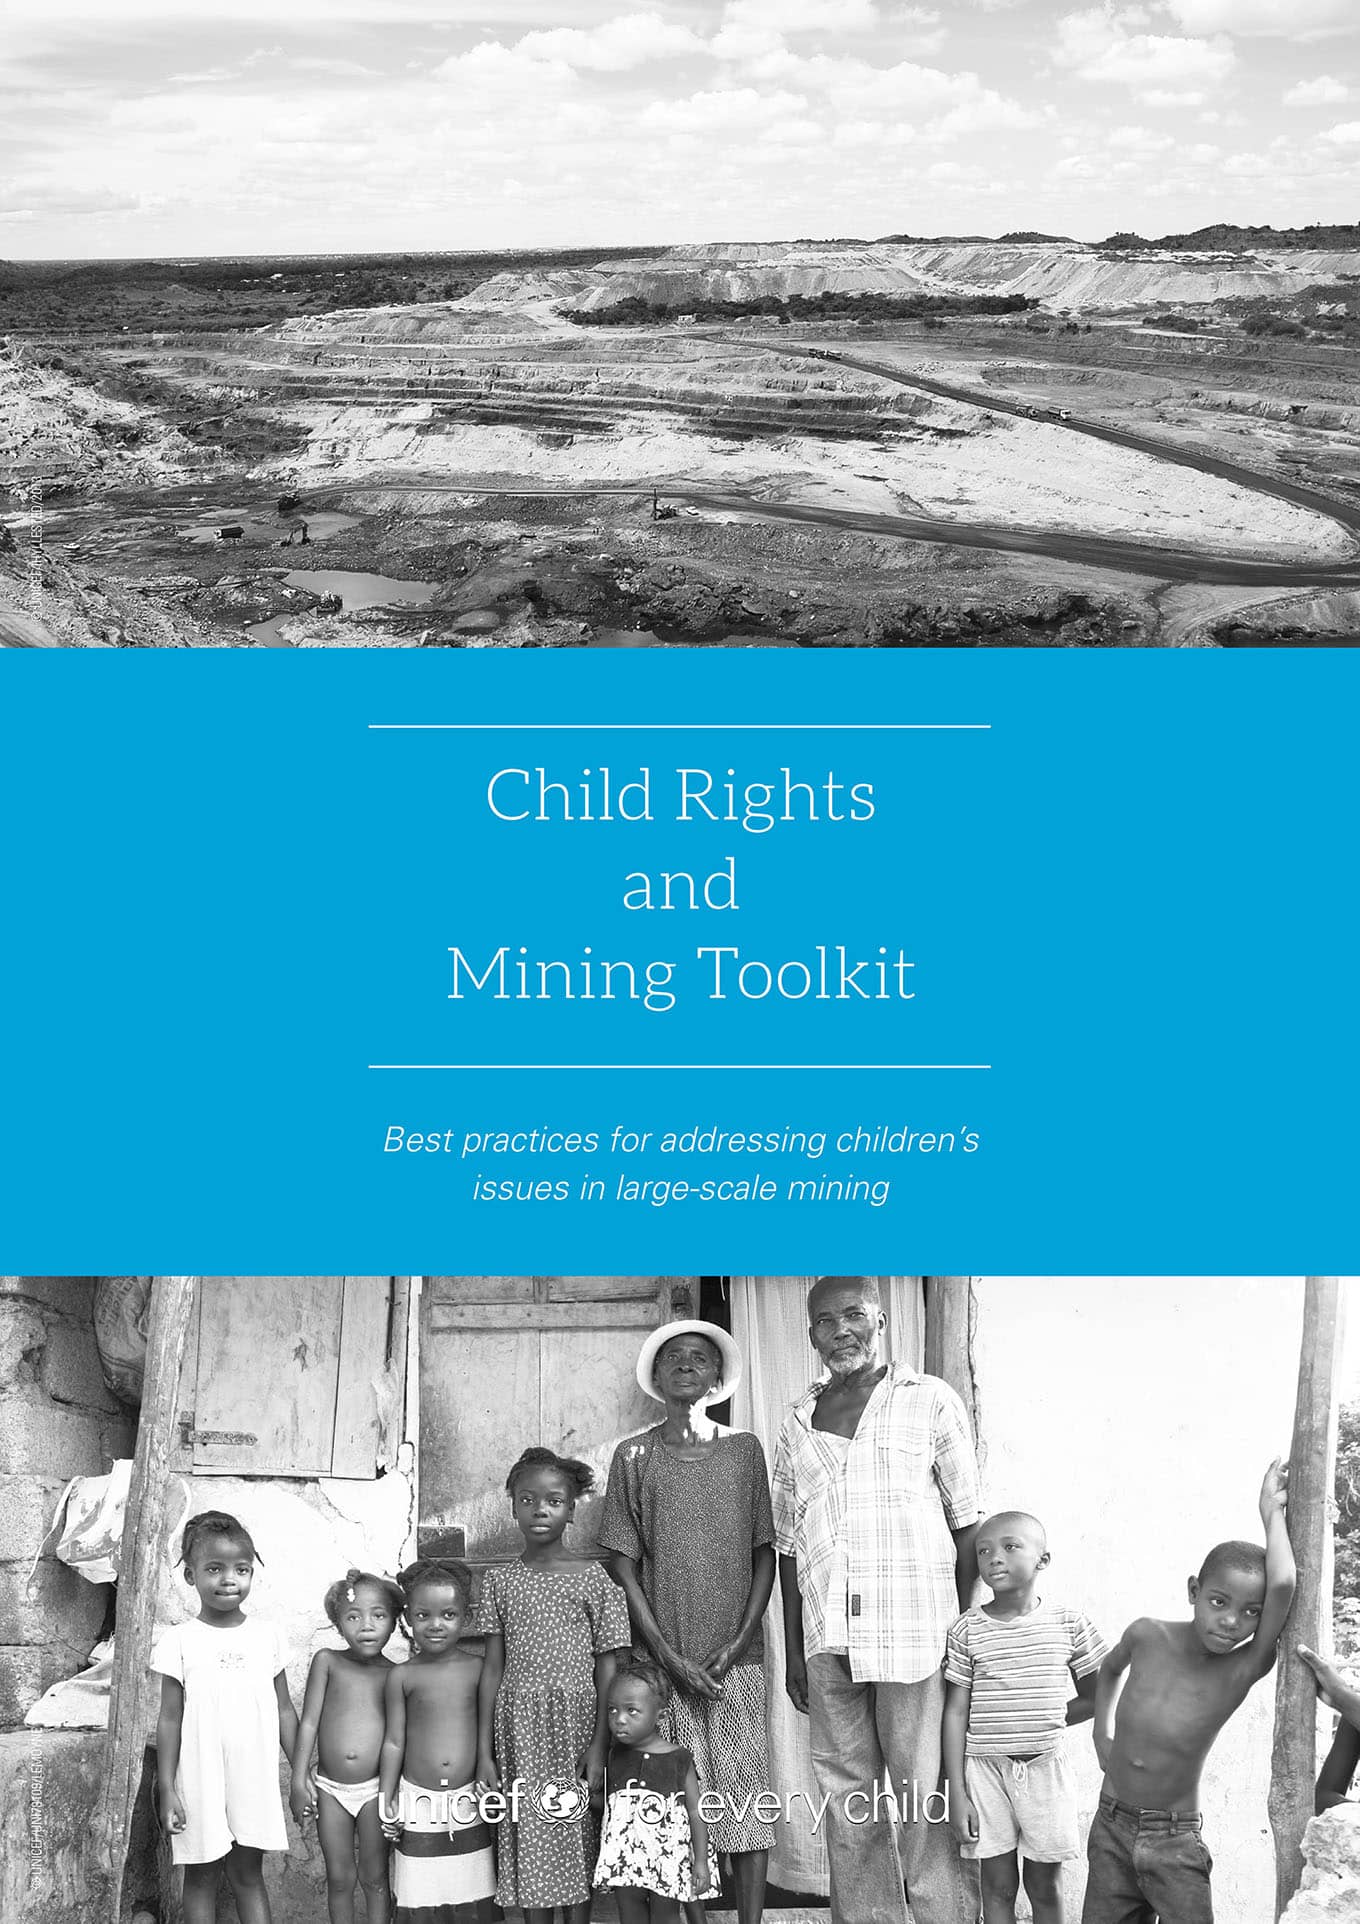 Child Rights and Mining Toolkit (UNICEF, 2017)